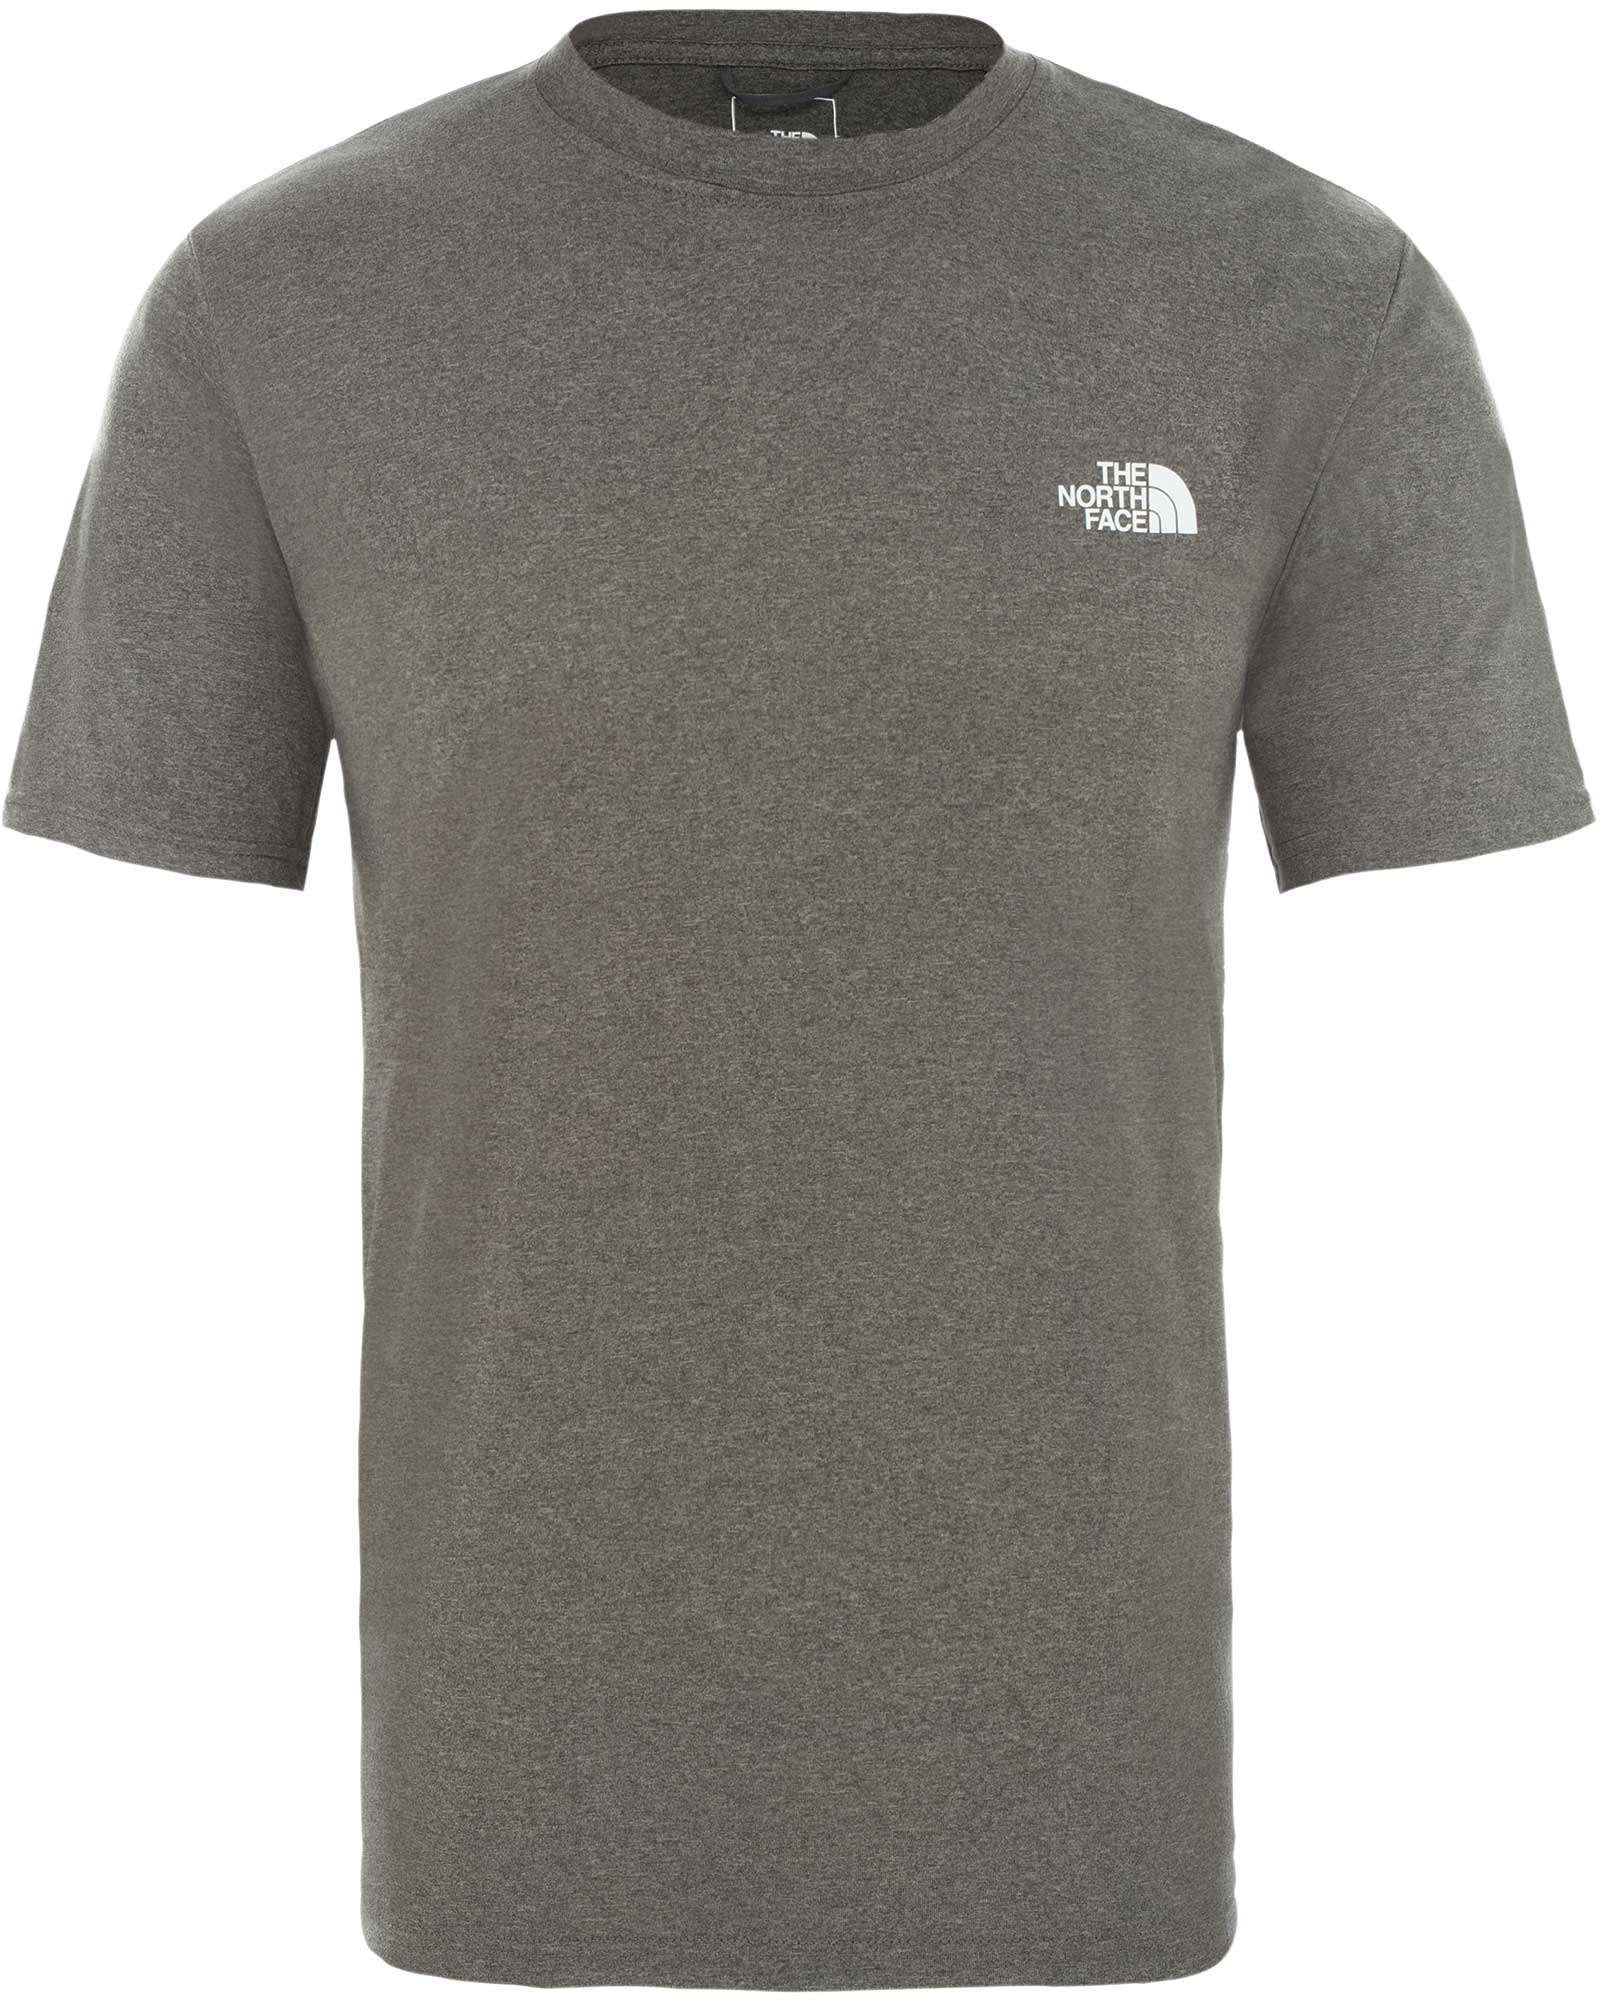 The North Face Reaxion Amp Men’s Crew T Shirt - New Taupe Green Heather XXL